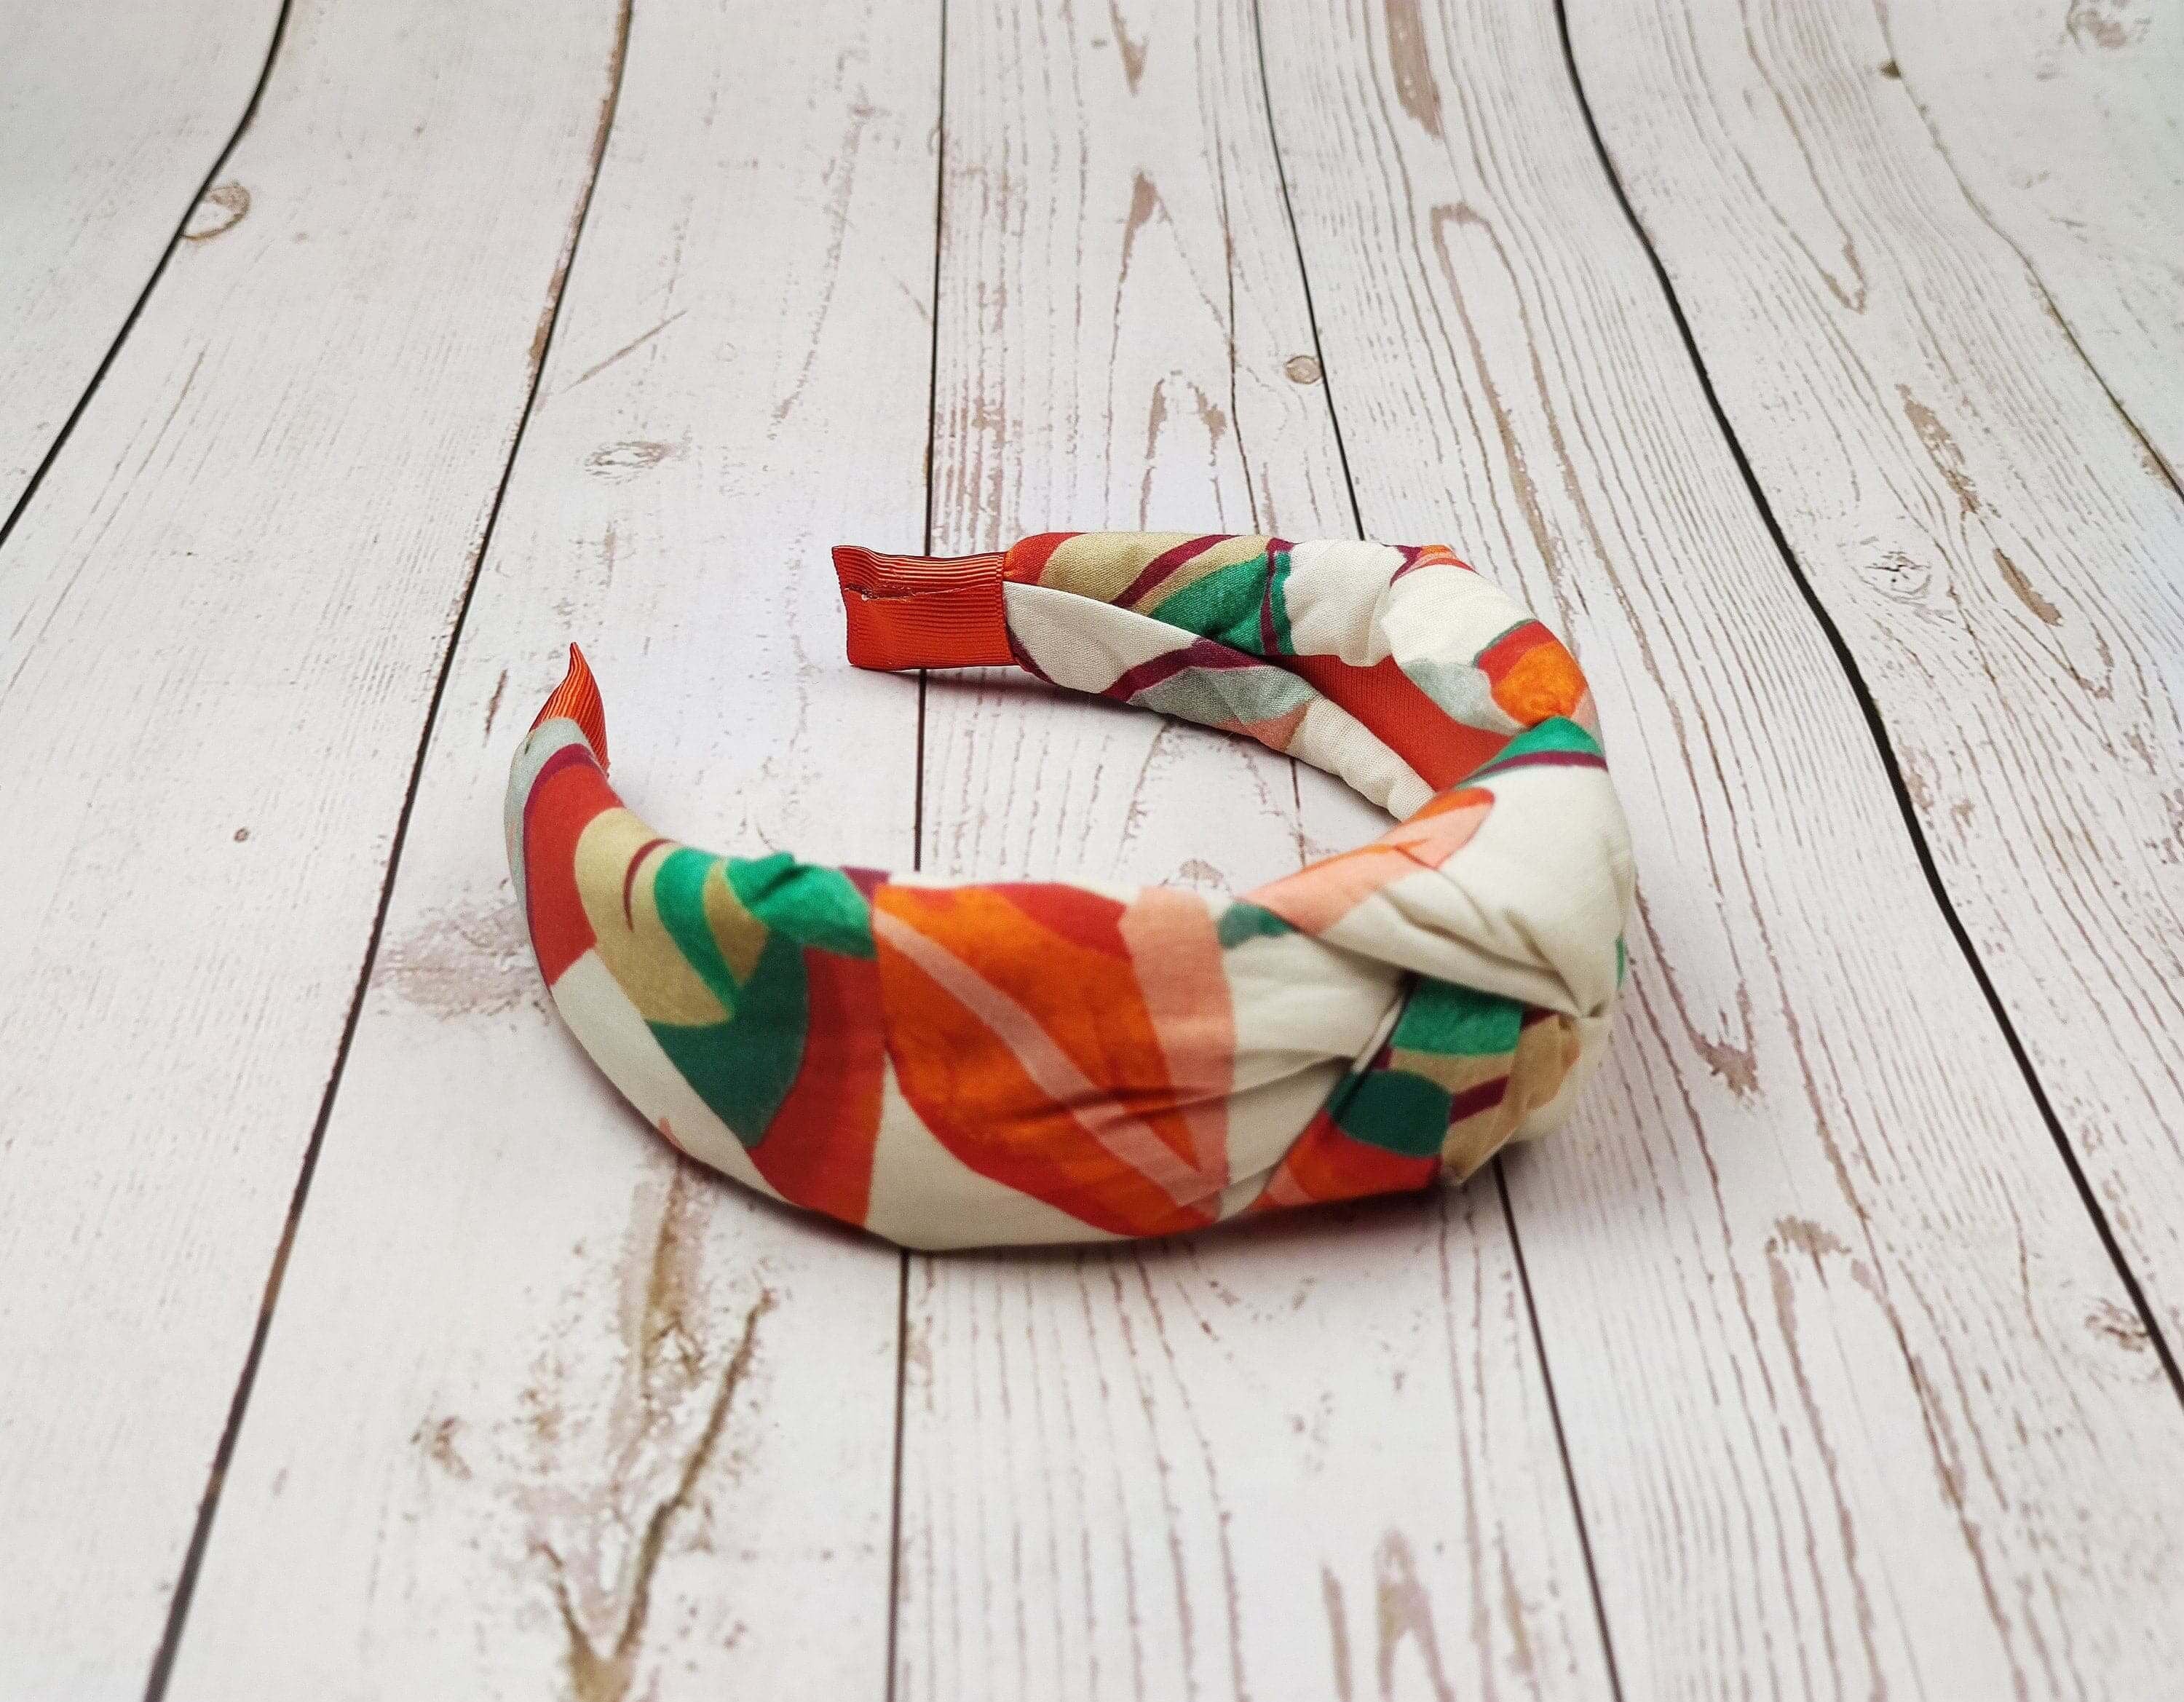 Upgrade her hair game with this must-have knotted headband in a bold cream, orange, and green color scheme.